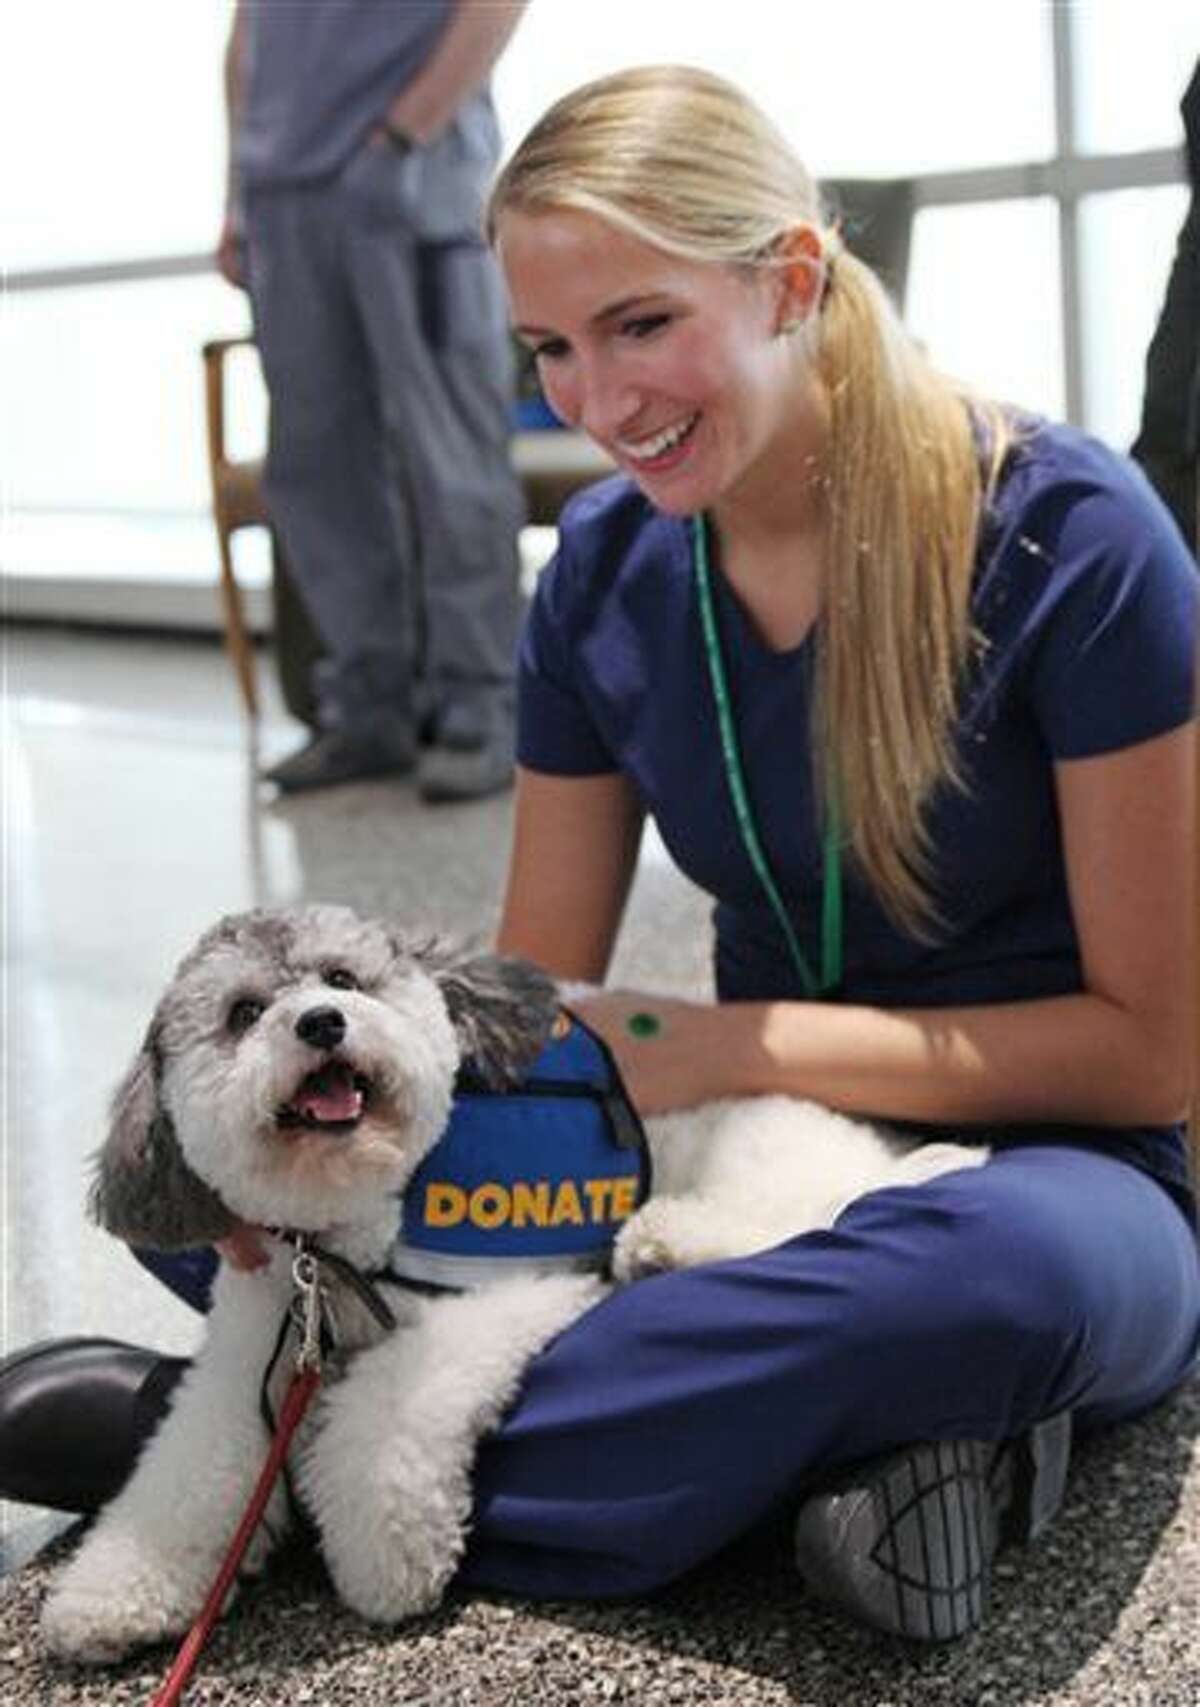 In this Feb. 18, 2016 photo, medical assistant Loren White pets Minnie, a Labradoodle mix at Rush University Medical Center in Chicago. The medical center has offered monthly sessions animal therapy for over a year as an employee health and satisfaction program, using dogs from a local shelter and an animal therapy group. Recently, Rush nurses launched a study to see if the program has tangible effects on employee stress and morale. (AP Photo/Carrie Antlfinger)